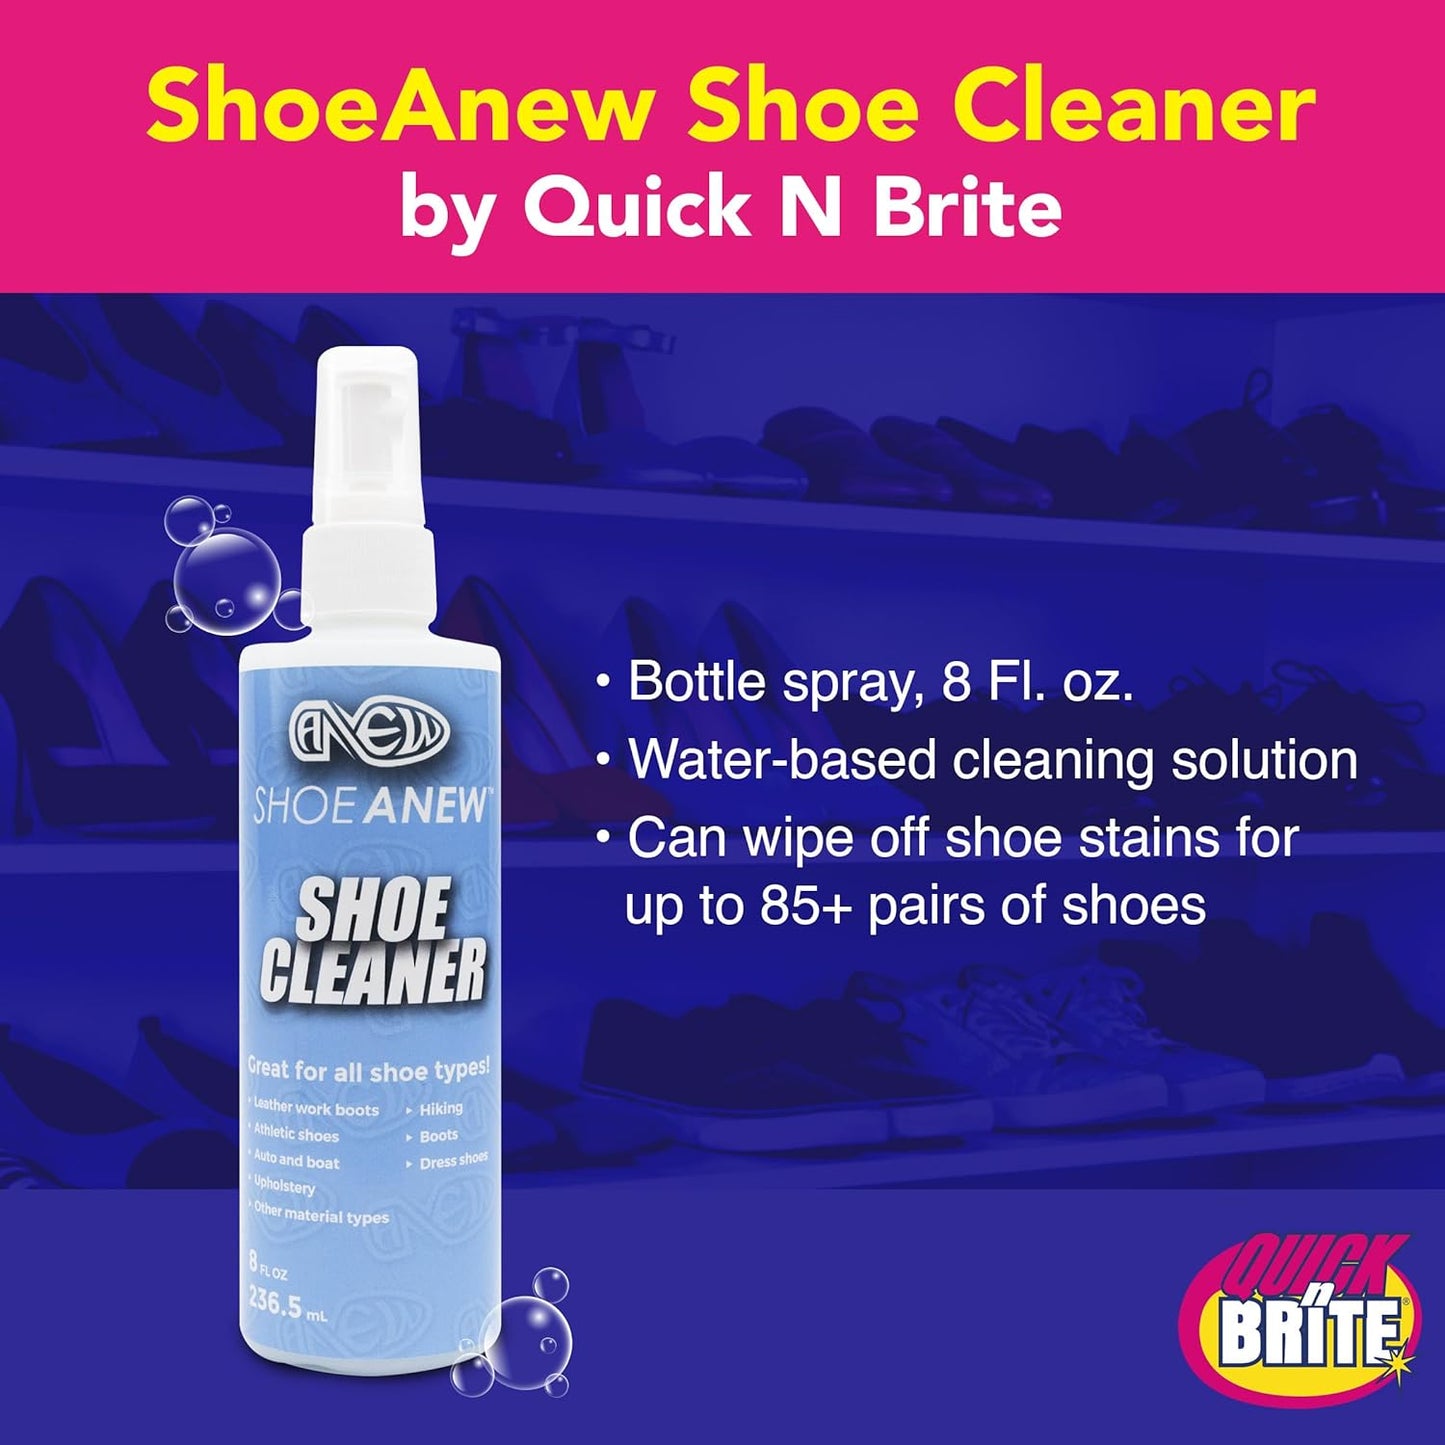 Quick N Brite 12 Oz Shoe Cleaner Kit for Sneakers, Boots, Vinyl, Knit and  Dress Shoes 